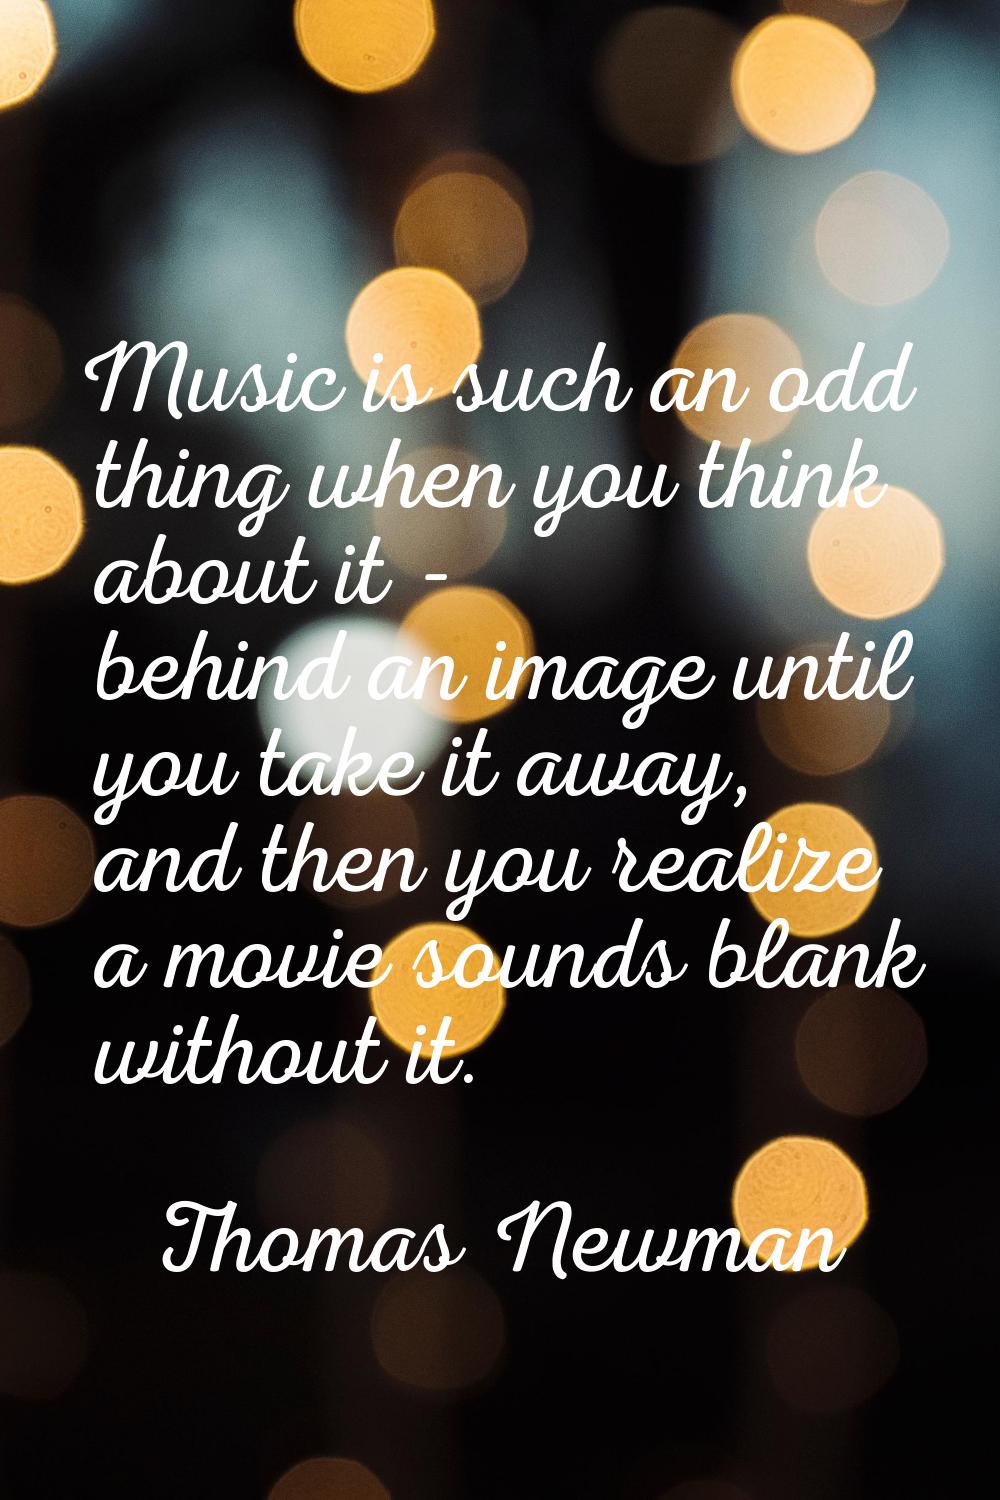 Music is such an odd thing when you think about it - behind an image until you take it away, and th